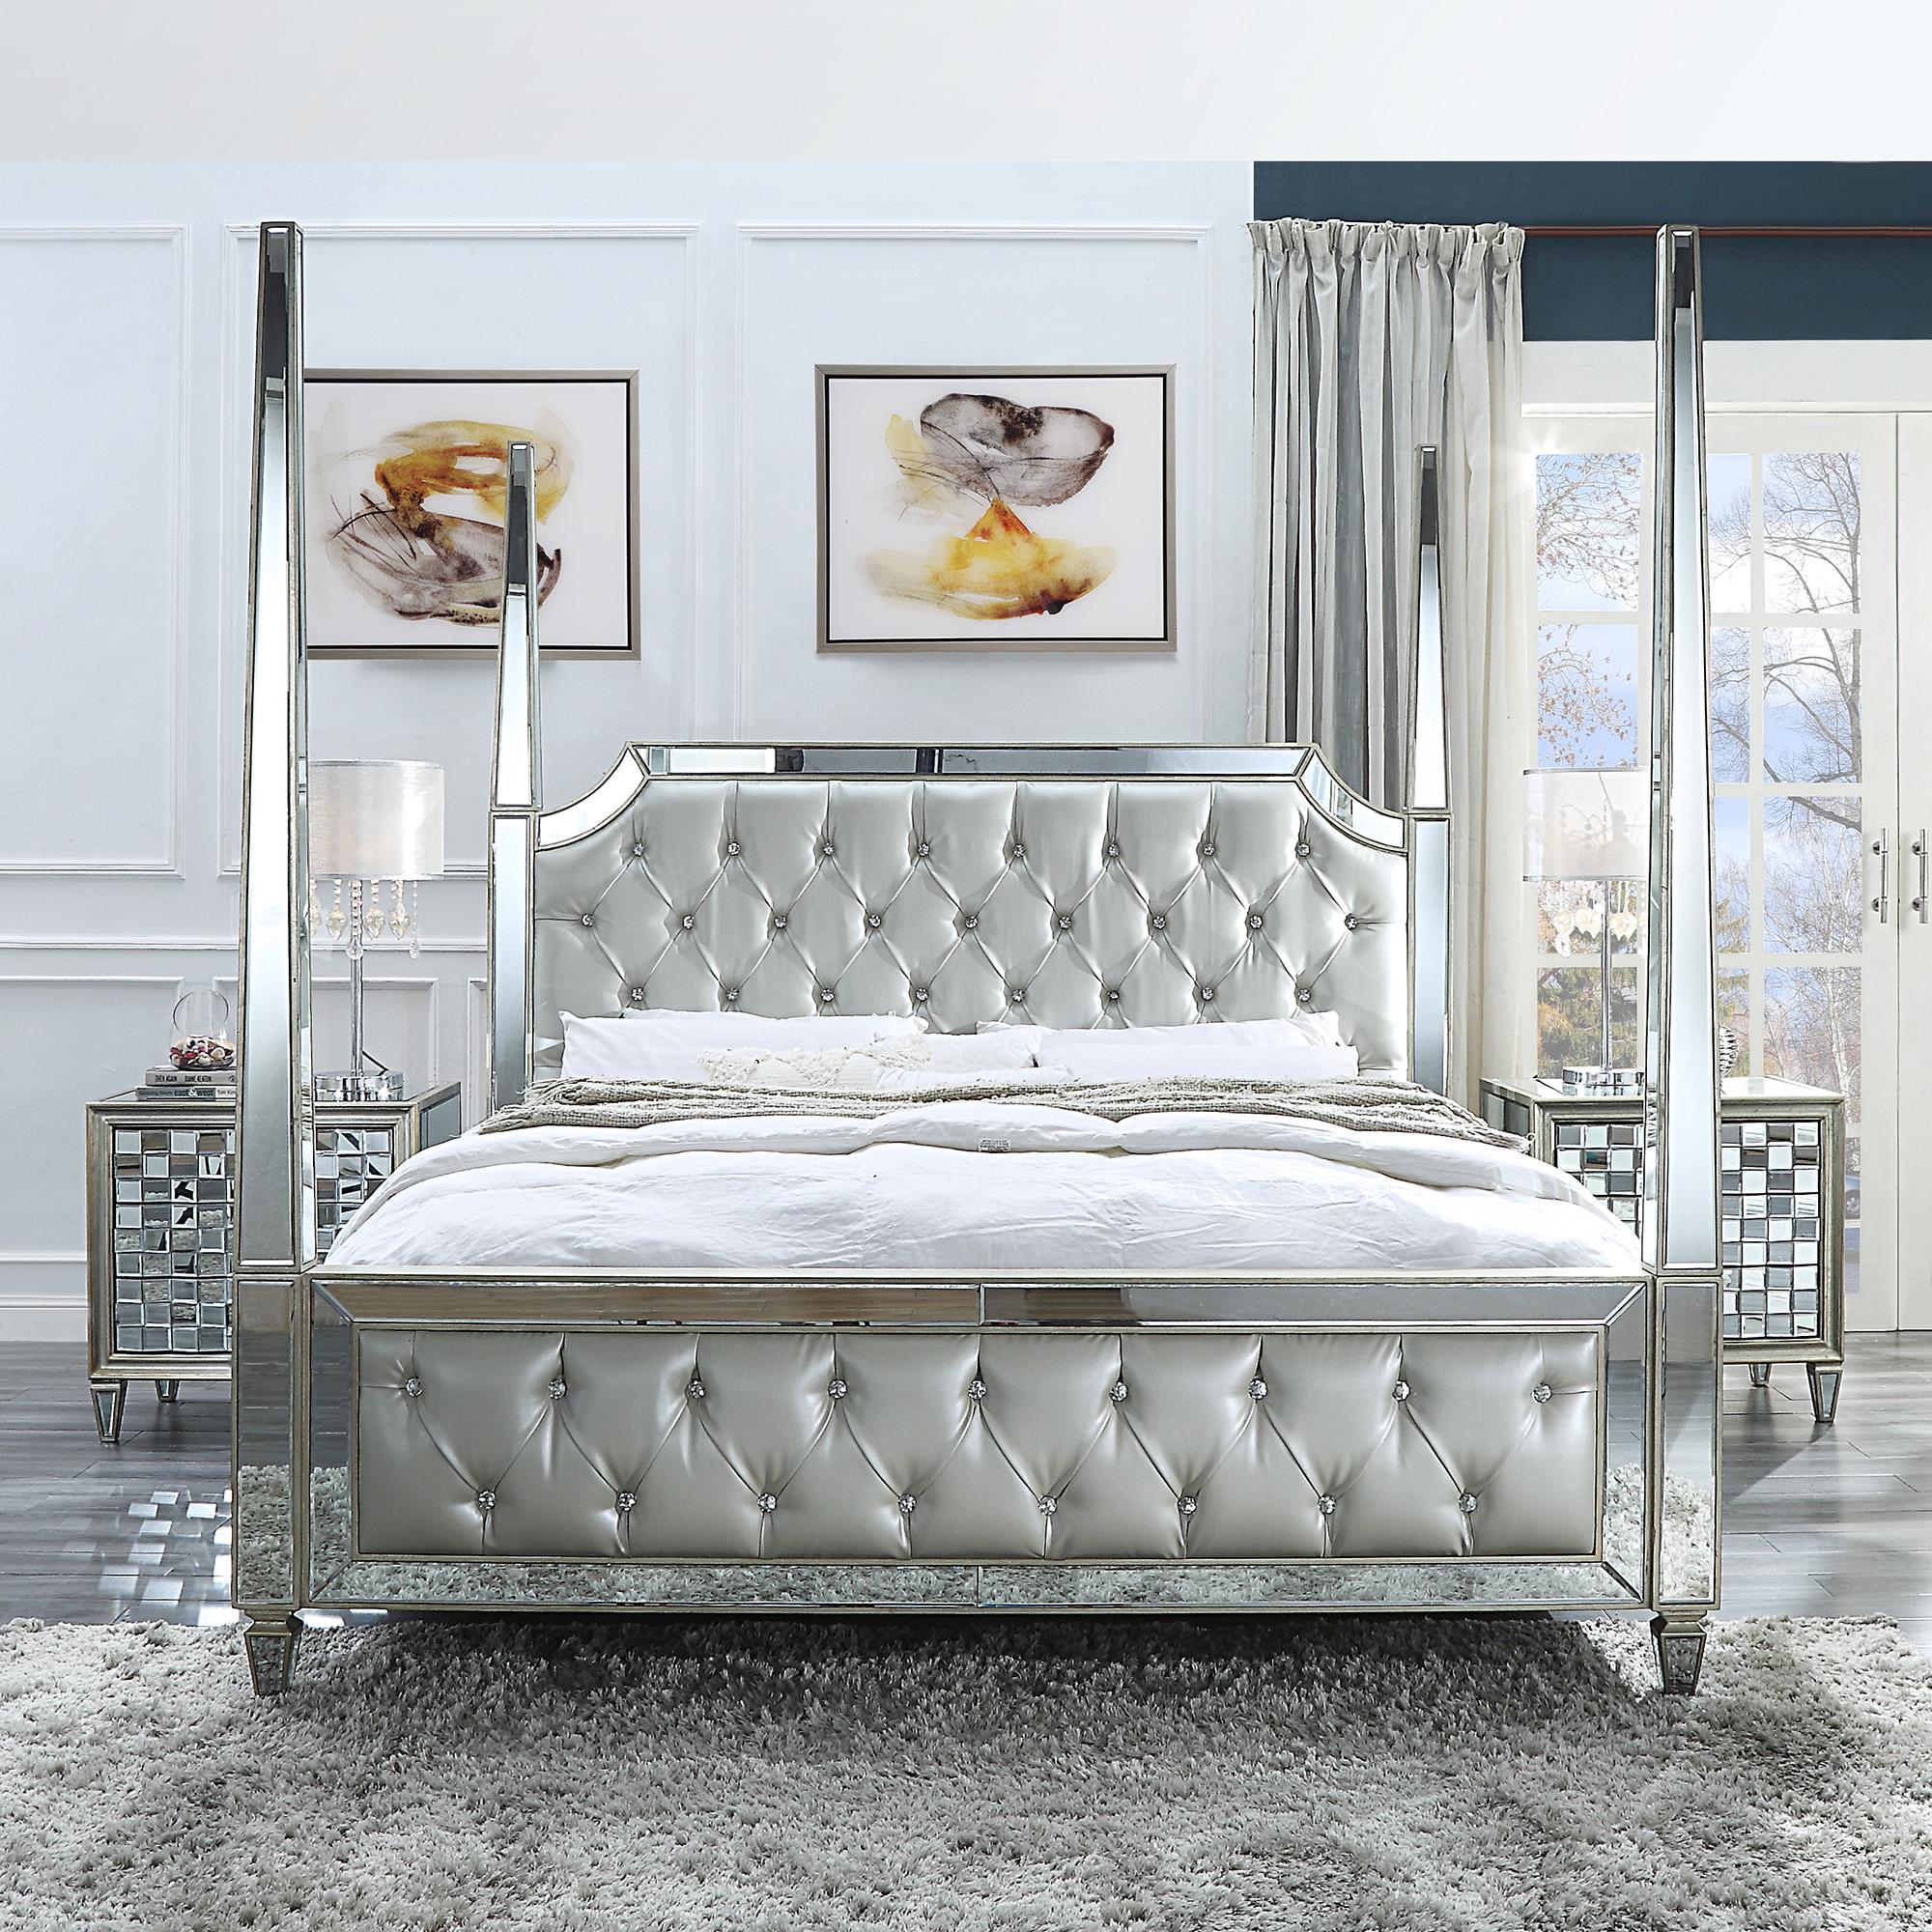 

    
Homey Design Furniture HD-6001 Canopy Bedroom Set Mirrored/Silver HD-CK6001-3PC
